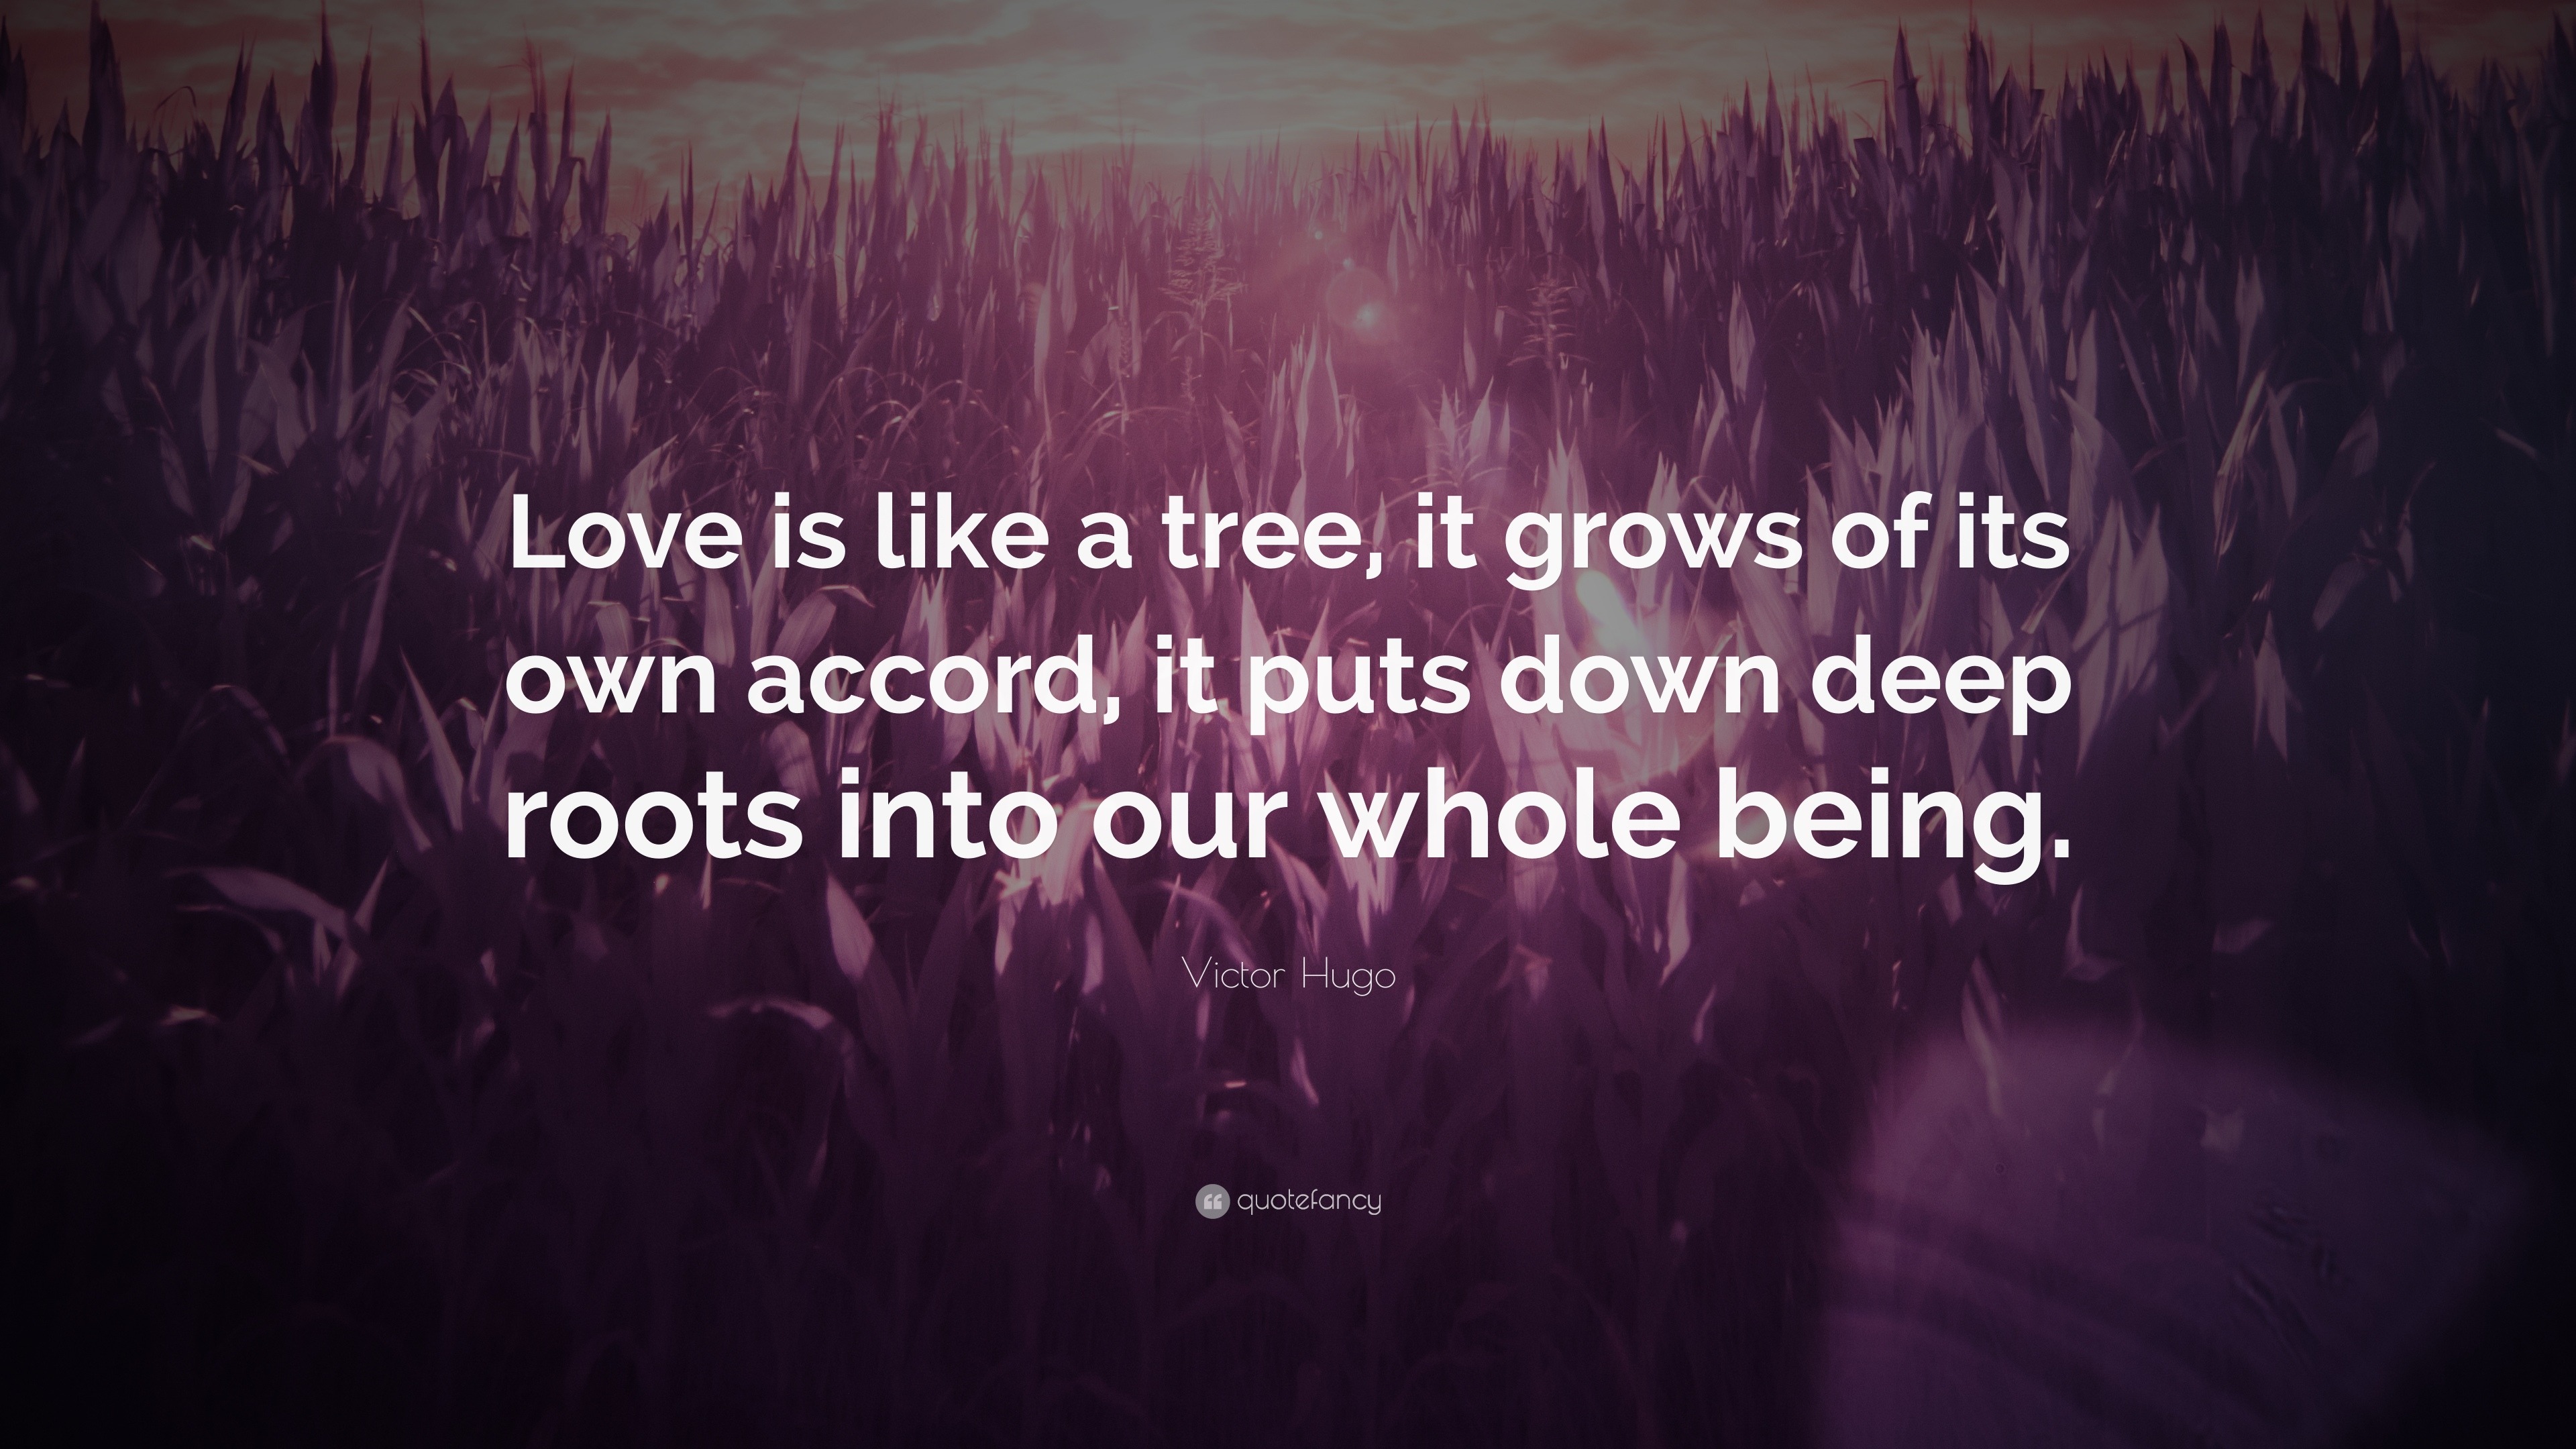 Victor Hugo Quote: "Love is like a tree, it grows of its own accord, it puts down deep roots ...